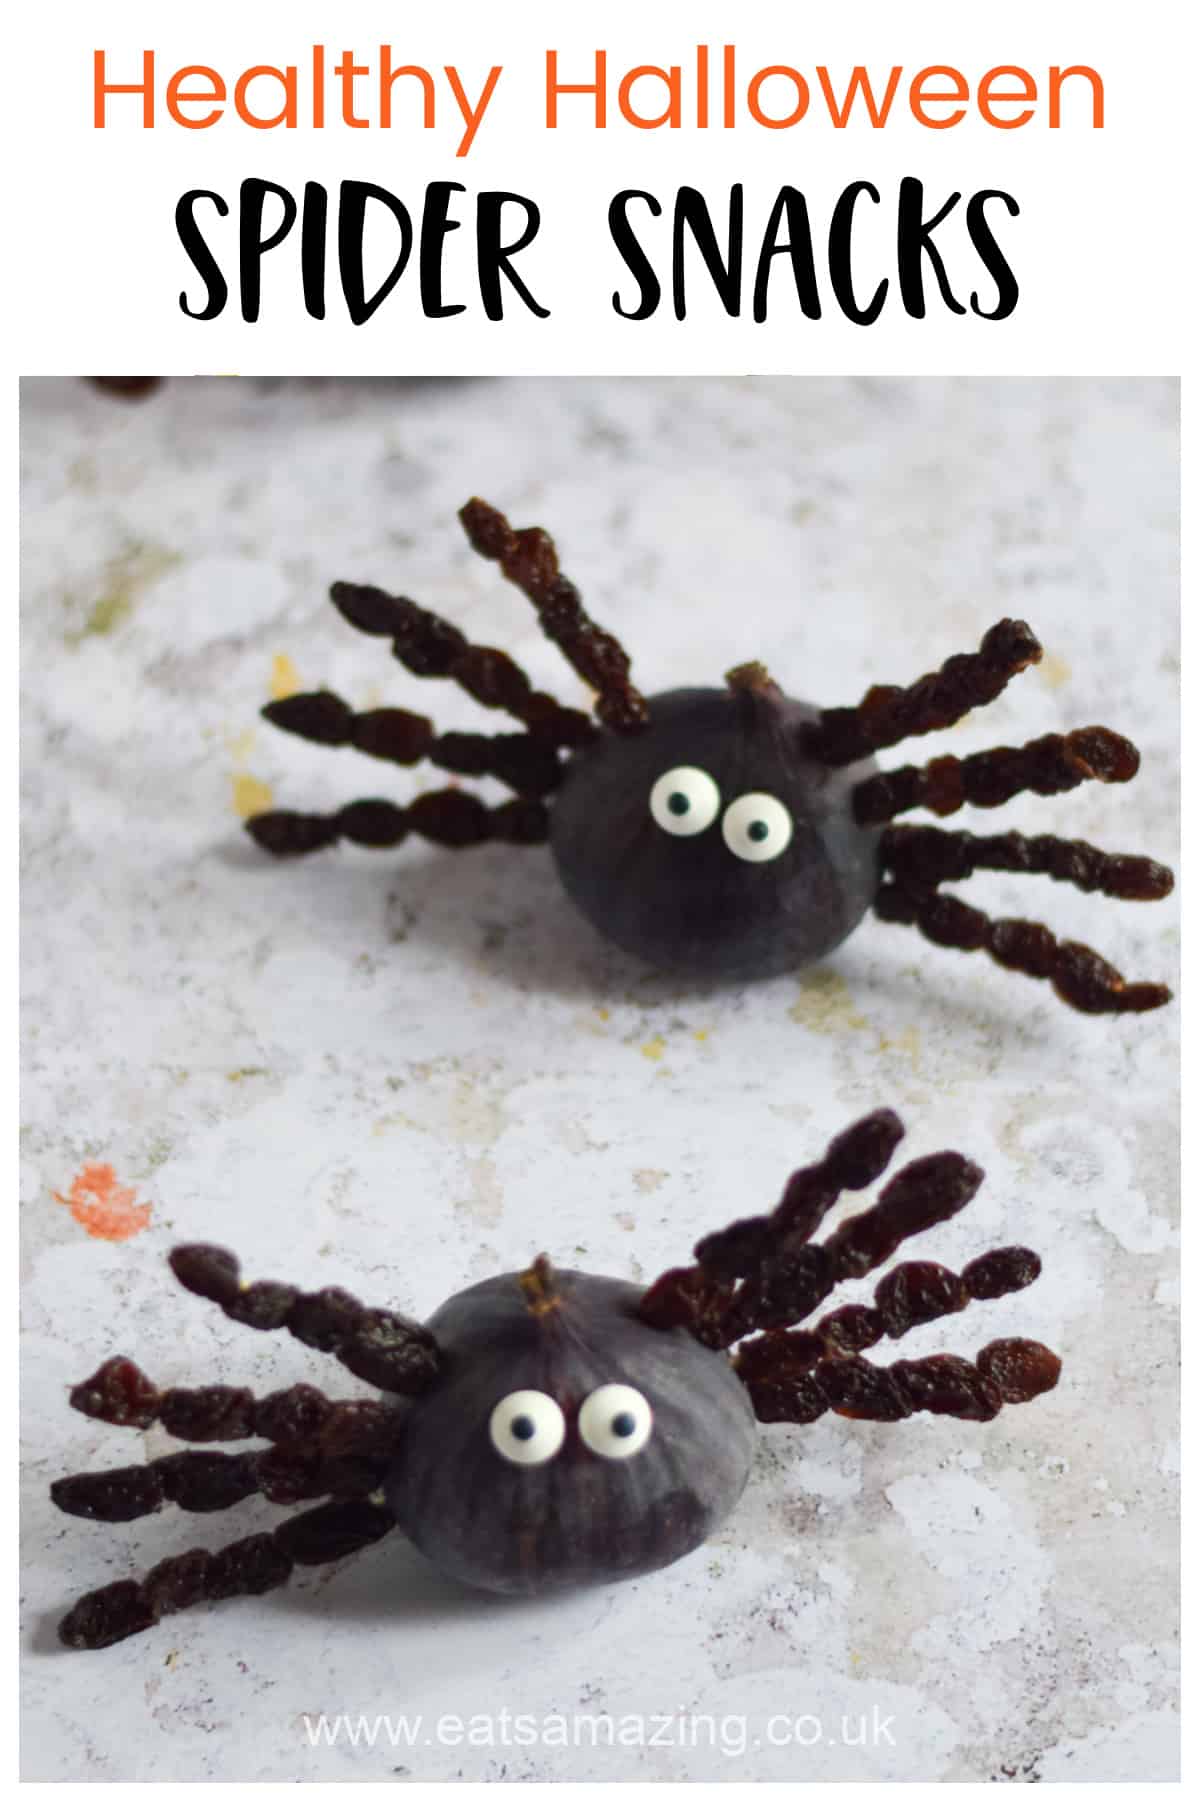 Fun Healthy Halloween Party food idea - these fig and raisin spiders make great spooky spider themed food for kids